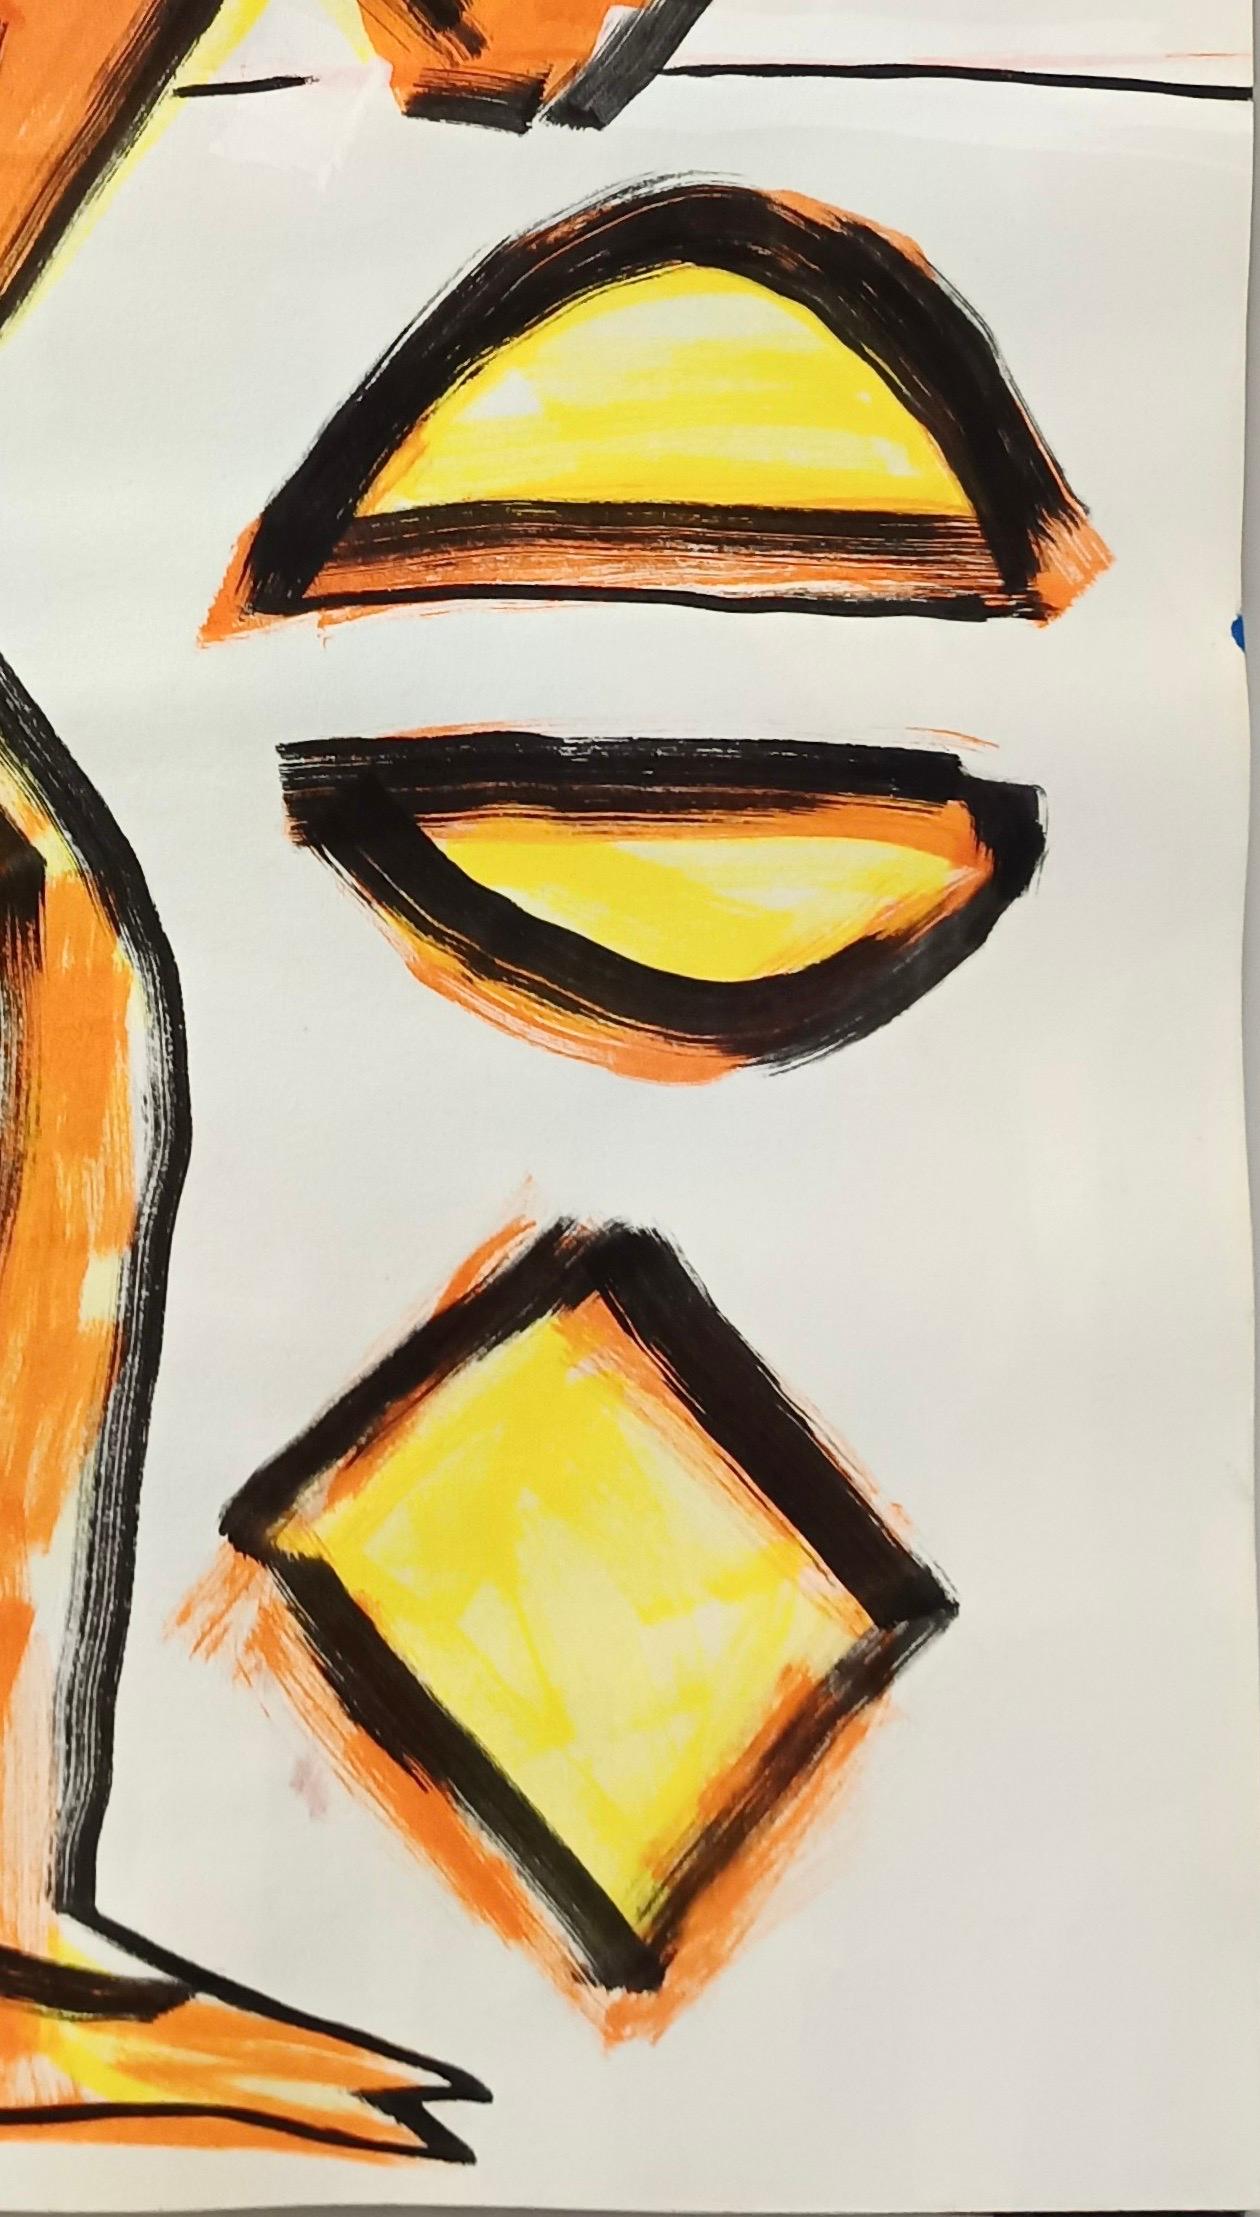 Untitled by E. Wenk, 2020 - 2021 - Orange and Yellow Acrylic, NeoExpressionism - Neo-Expressionist Painting by Enzio Wenk